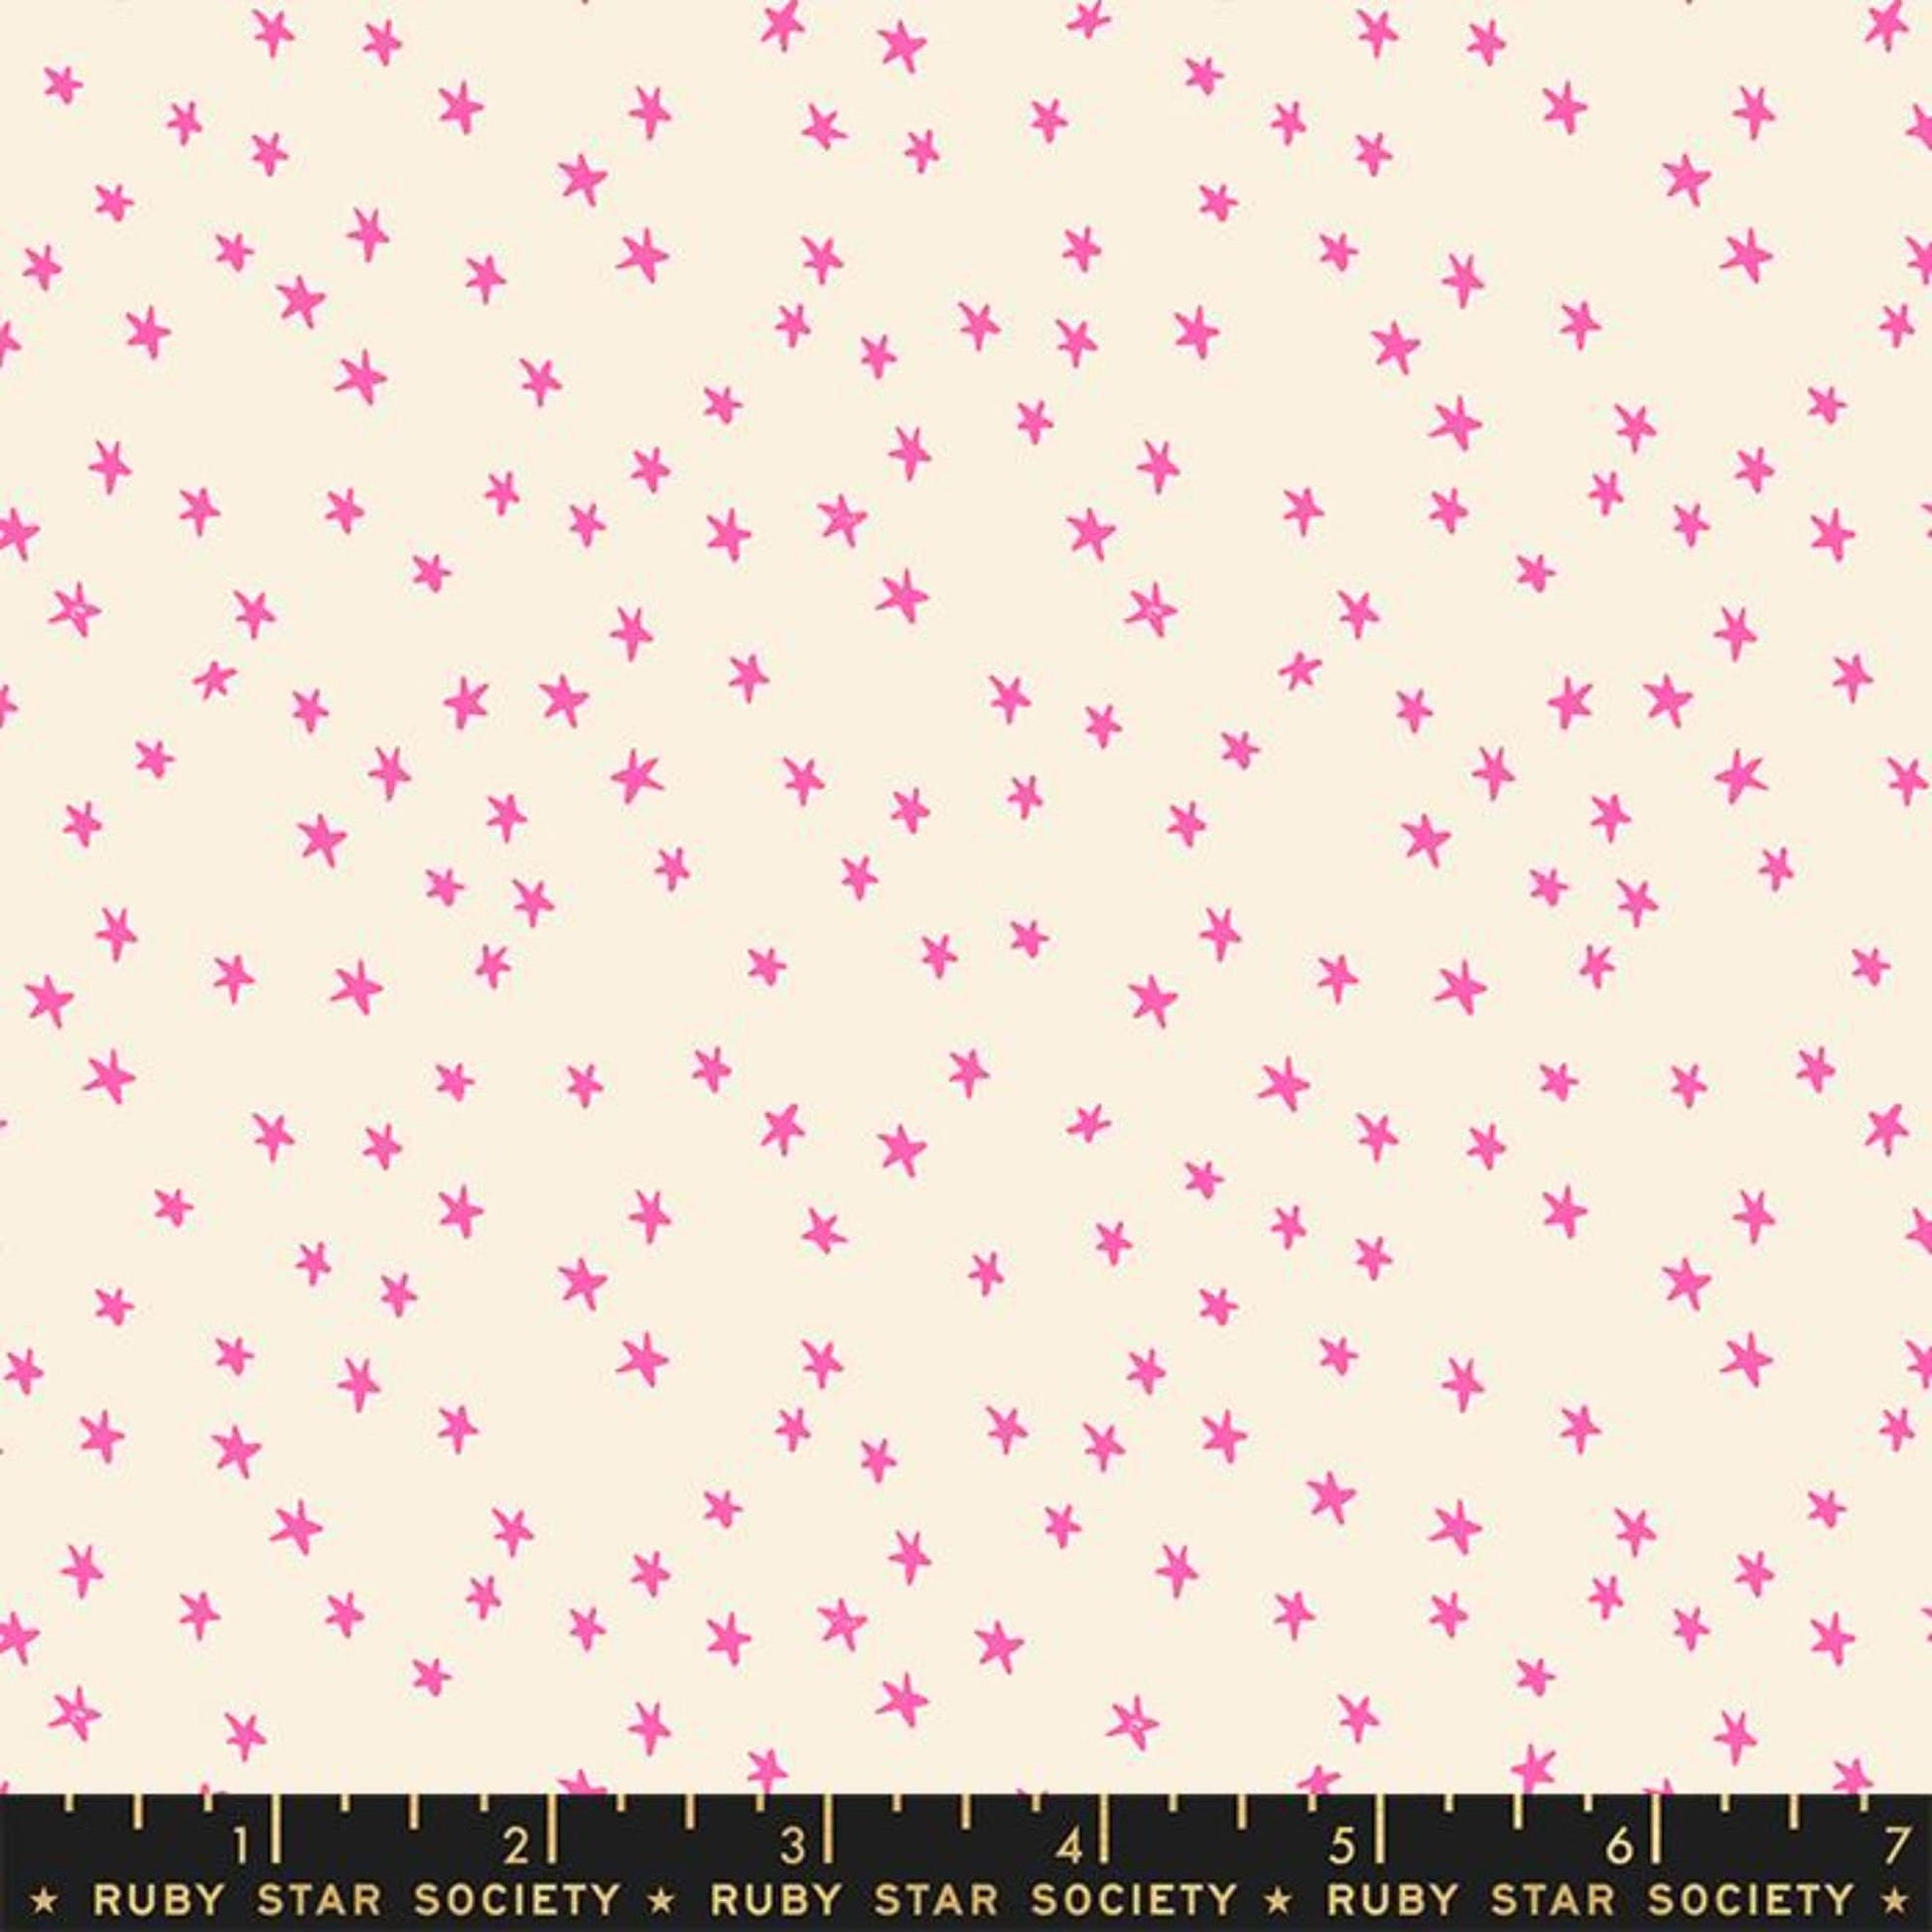 Starry MINI Neon Pink Starry Alexia Abegg Ruby Star Society Fabric Moda 100% Quilters Cotton RS4110 22 Fabric Fetish